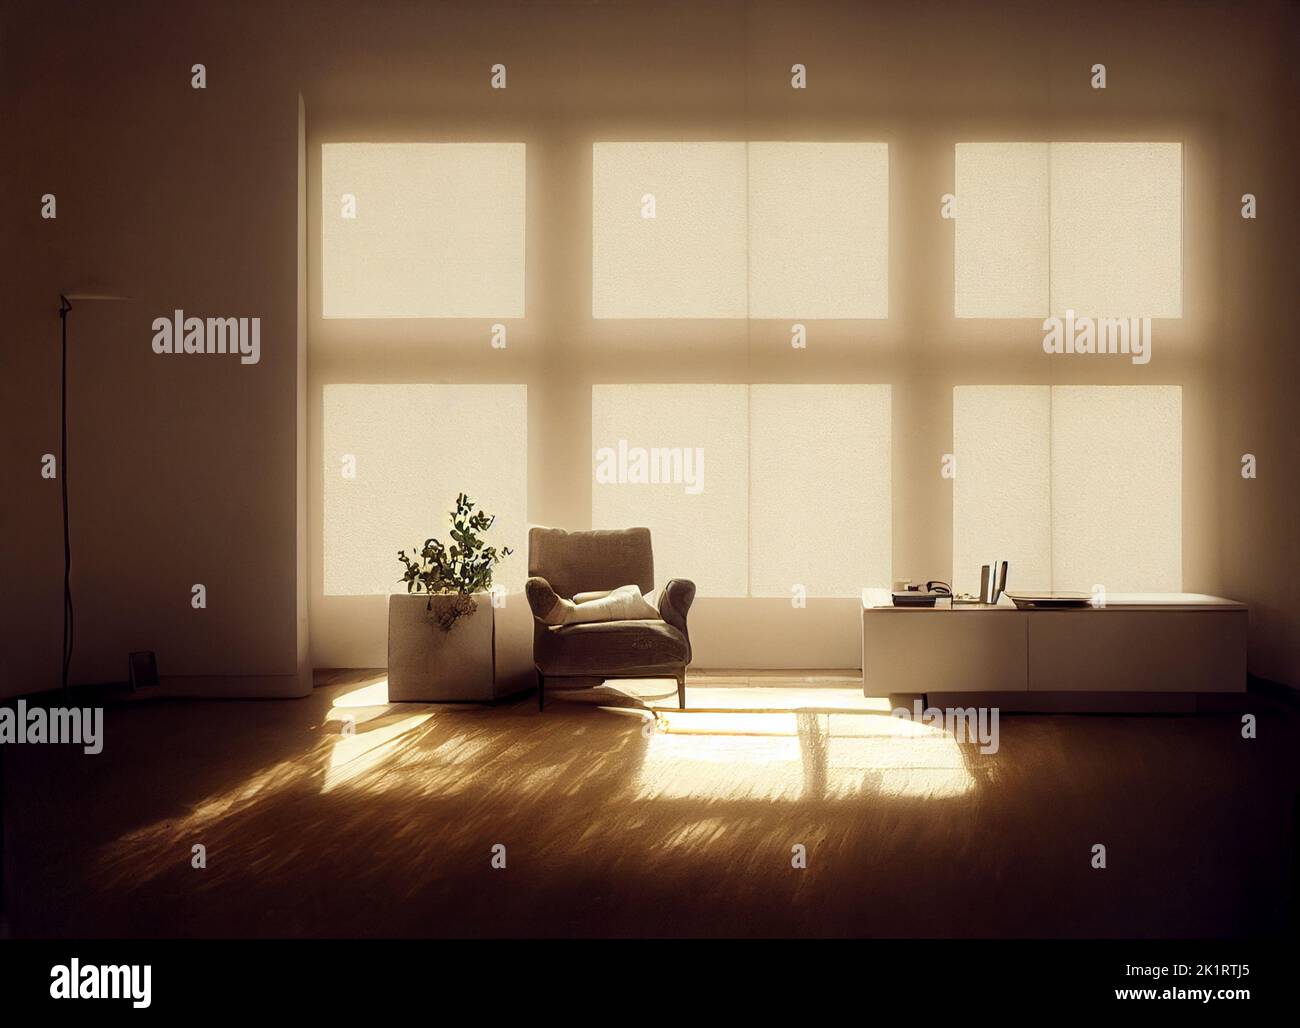 The large window with sunlight, Digital Generate Image Stock Photo